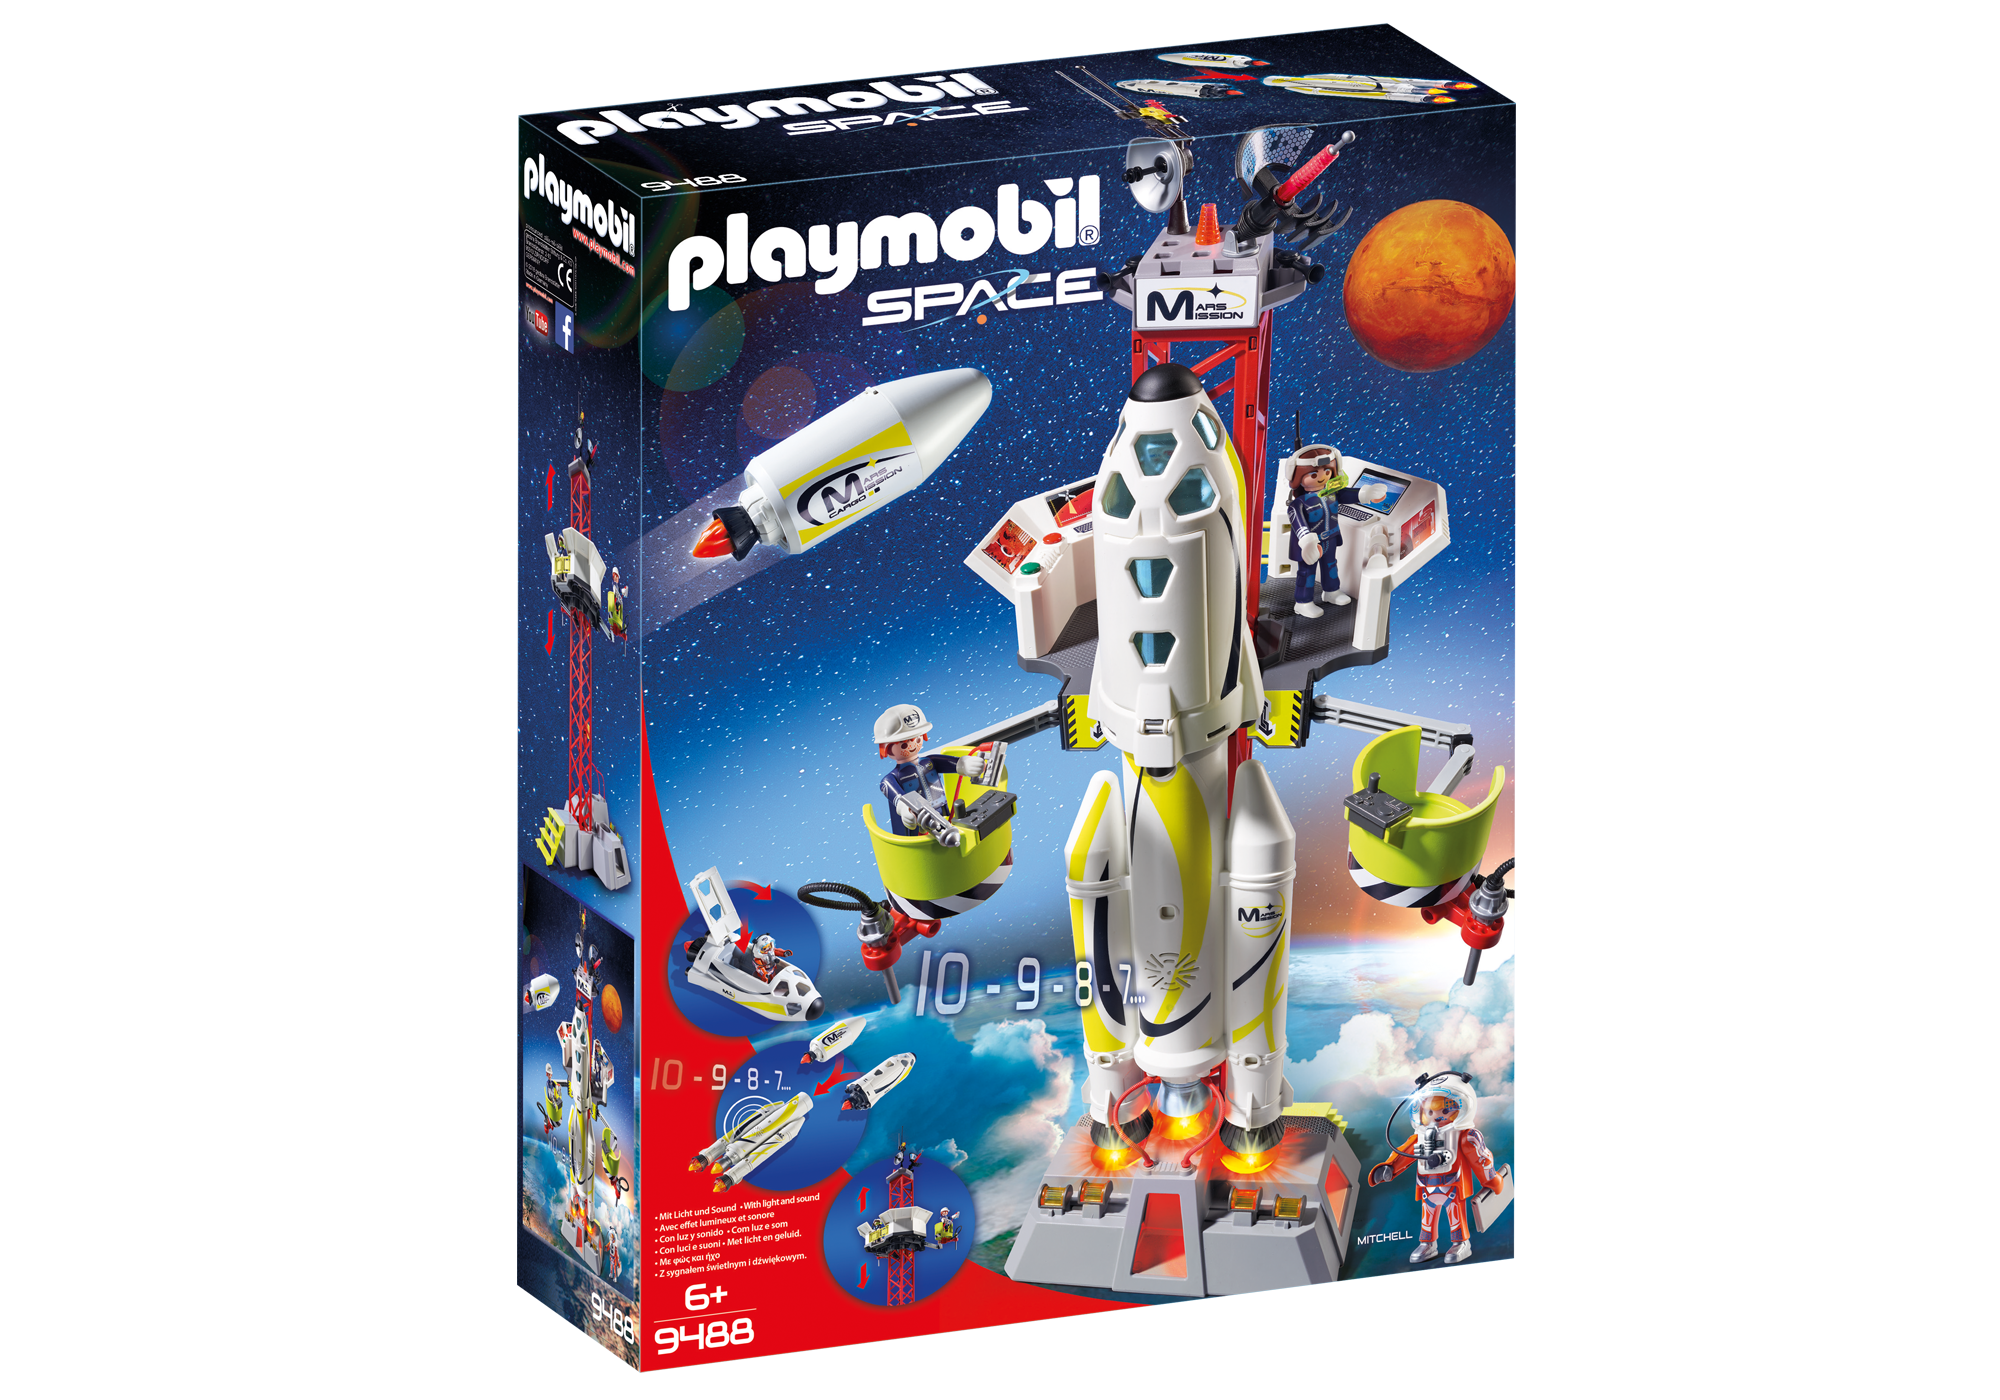 playmobil 6195 city action space rocket with launch site and flashing lights & sounds